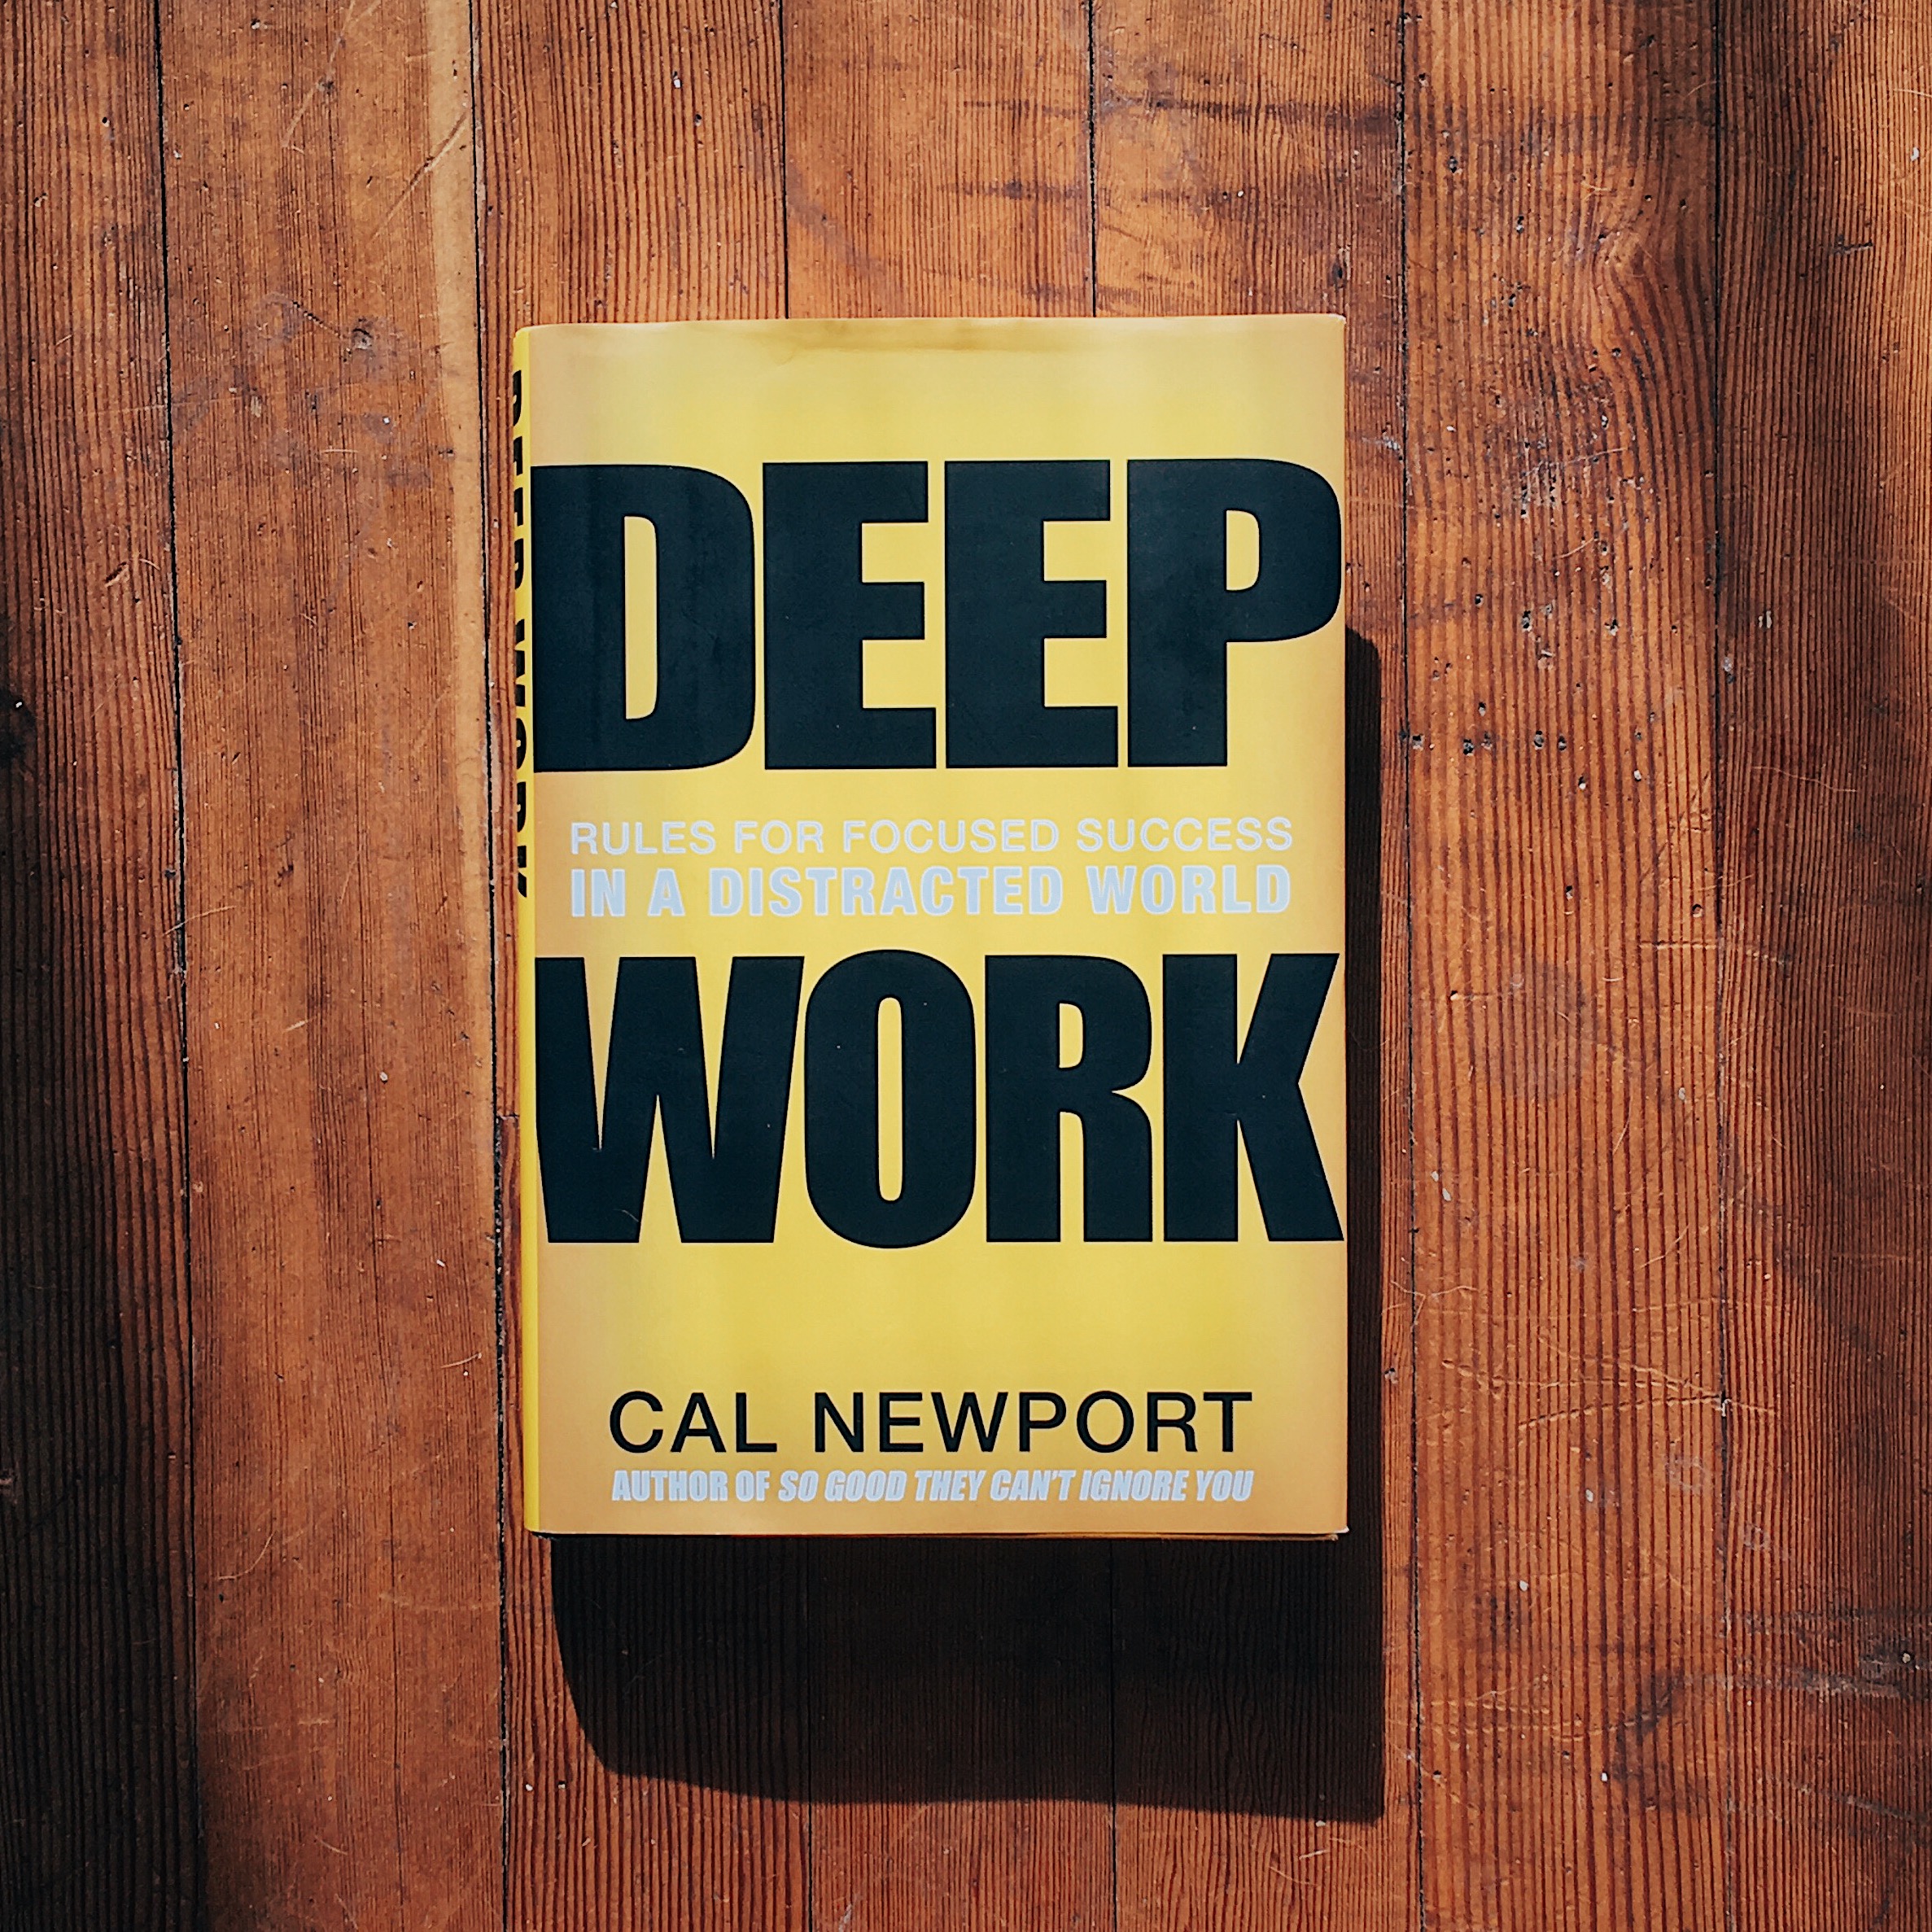 Success in a distracted world: DEEP WORK by Cal Newport 